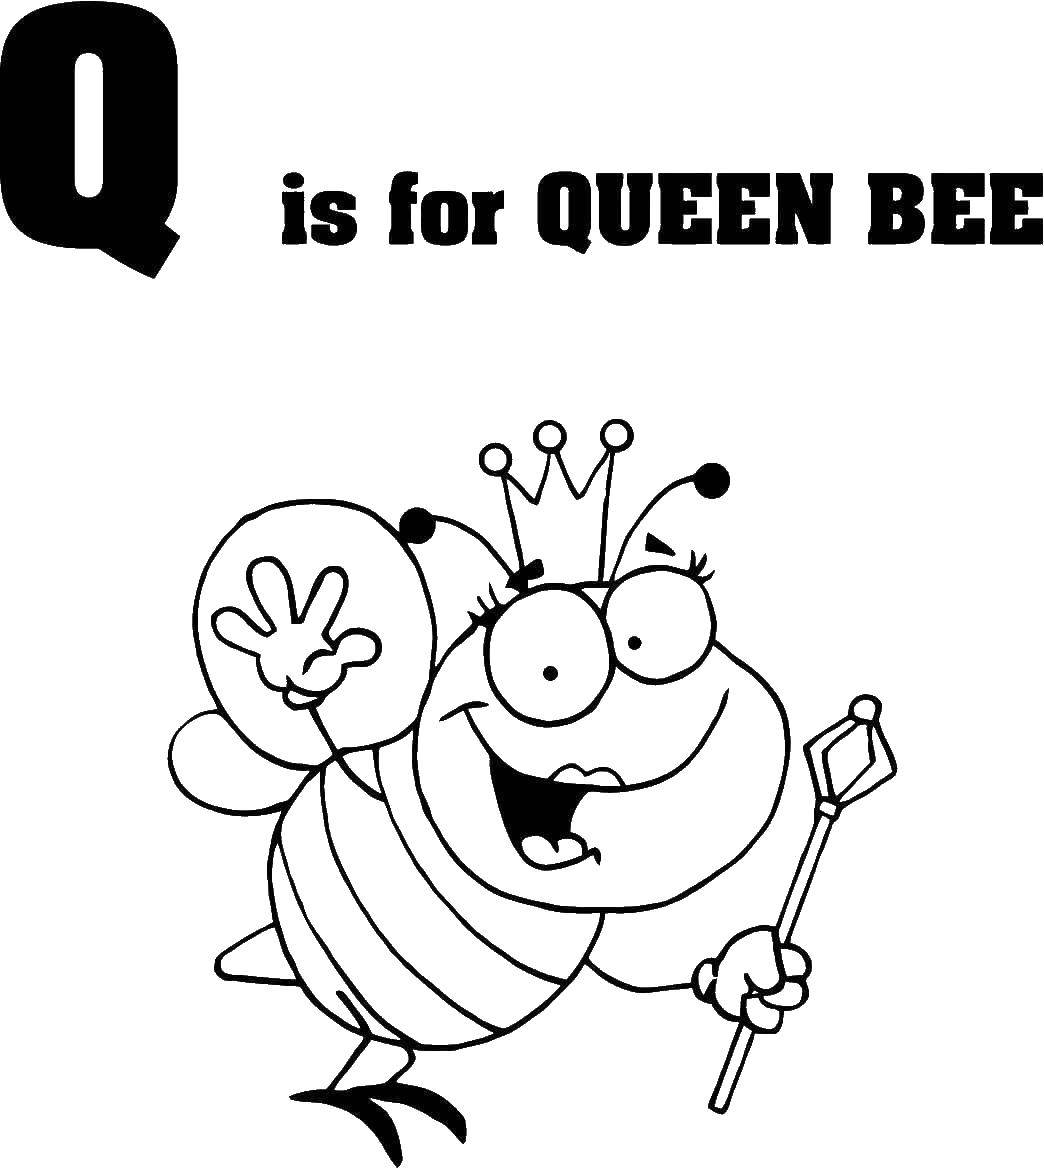 Coloring Royal bee. Category English alphabet. Tags:  bee.